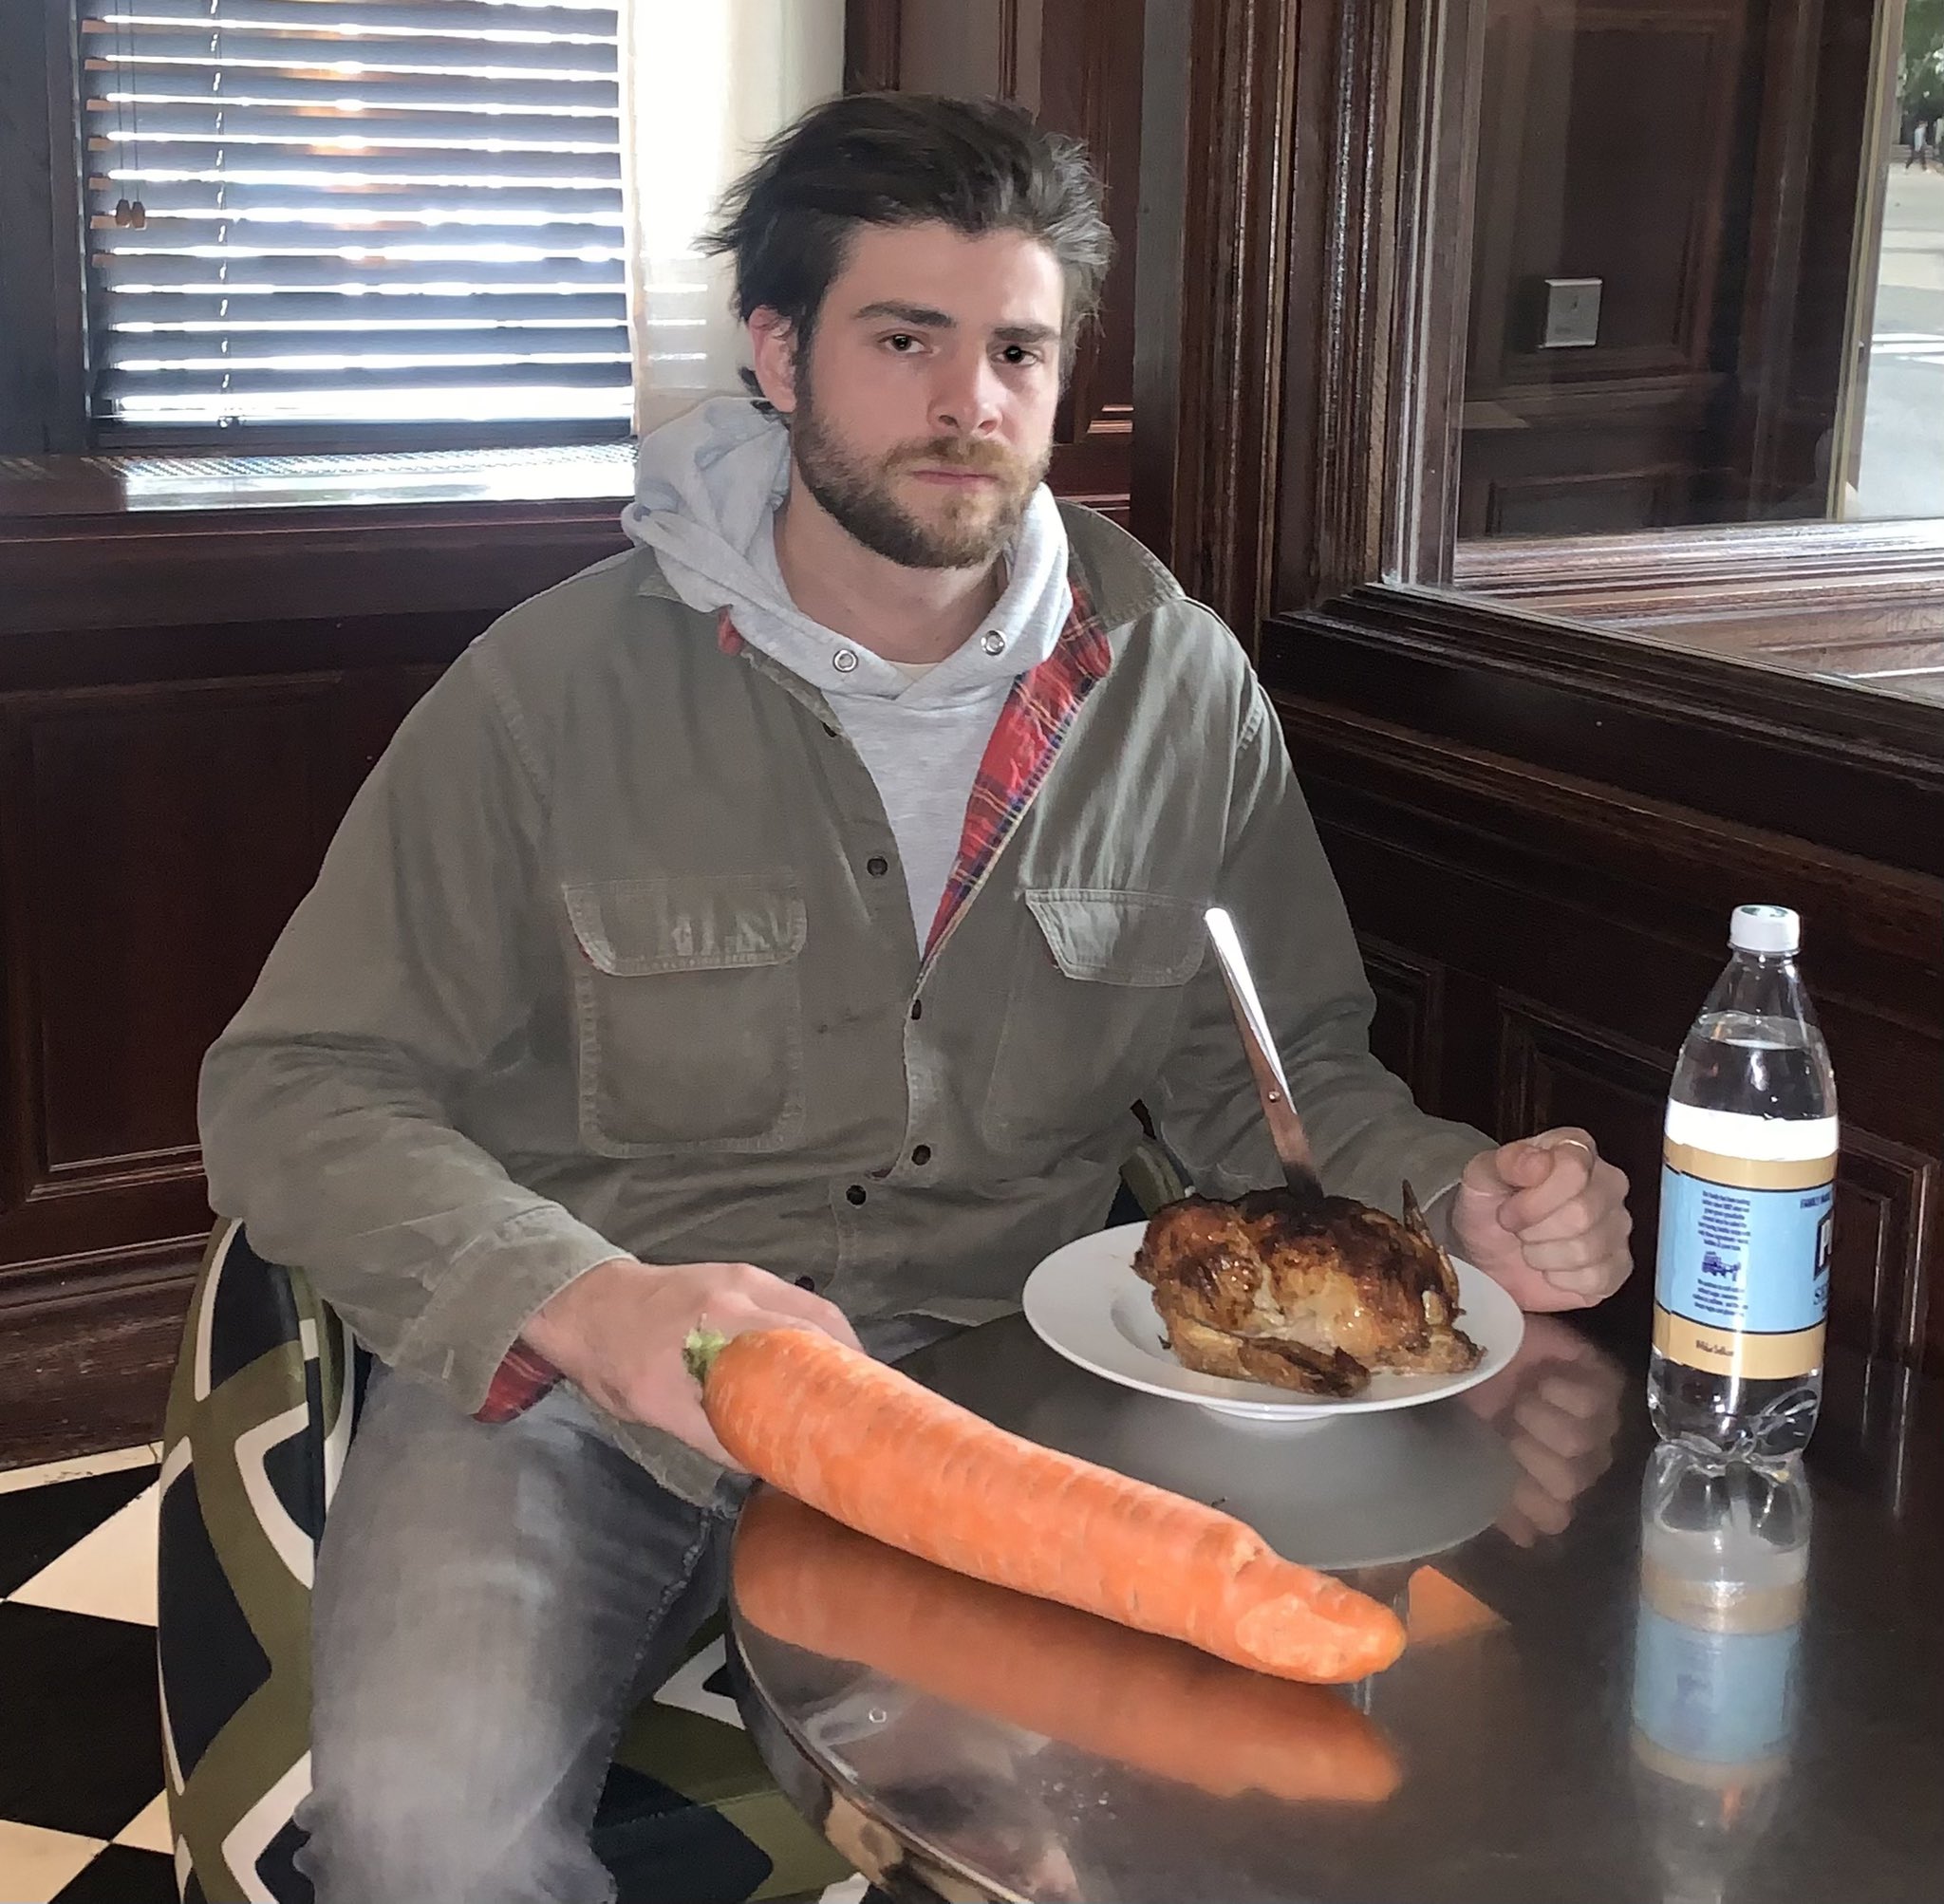 Man looking at the camera, with a carrot and bowl in front of him